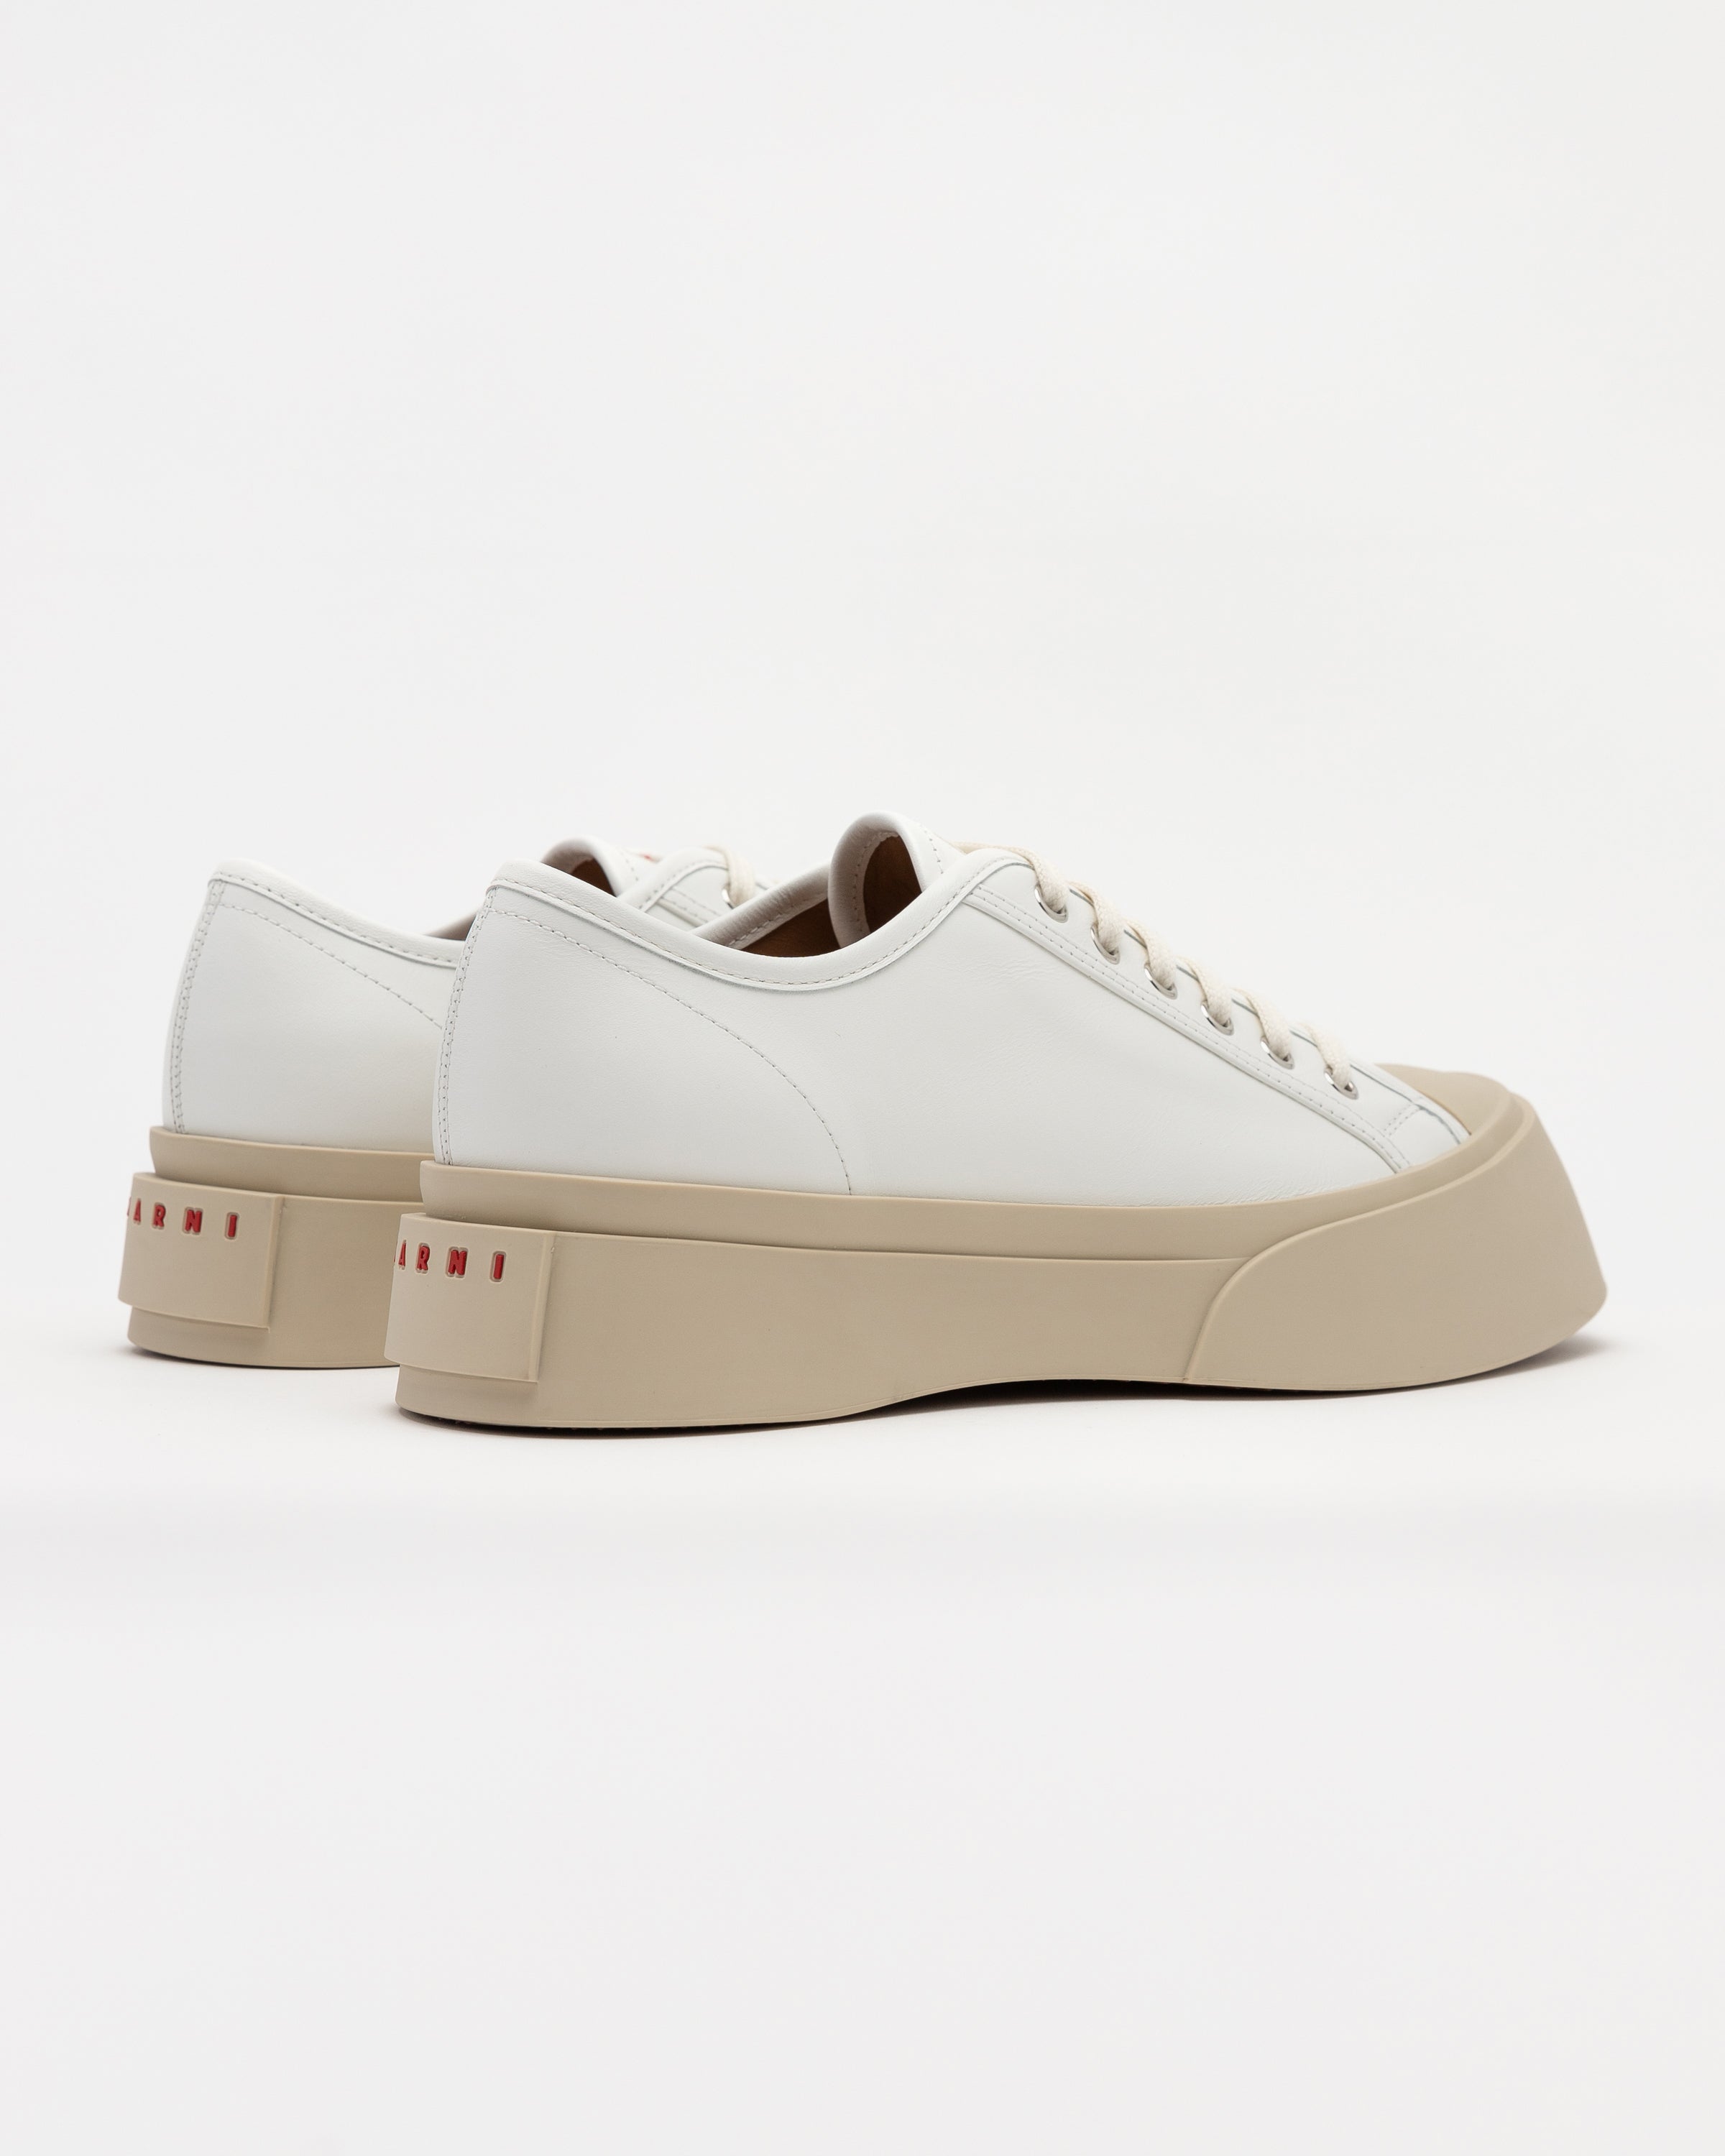 Pablo Lace-Up Sneaker in White